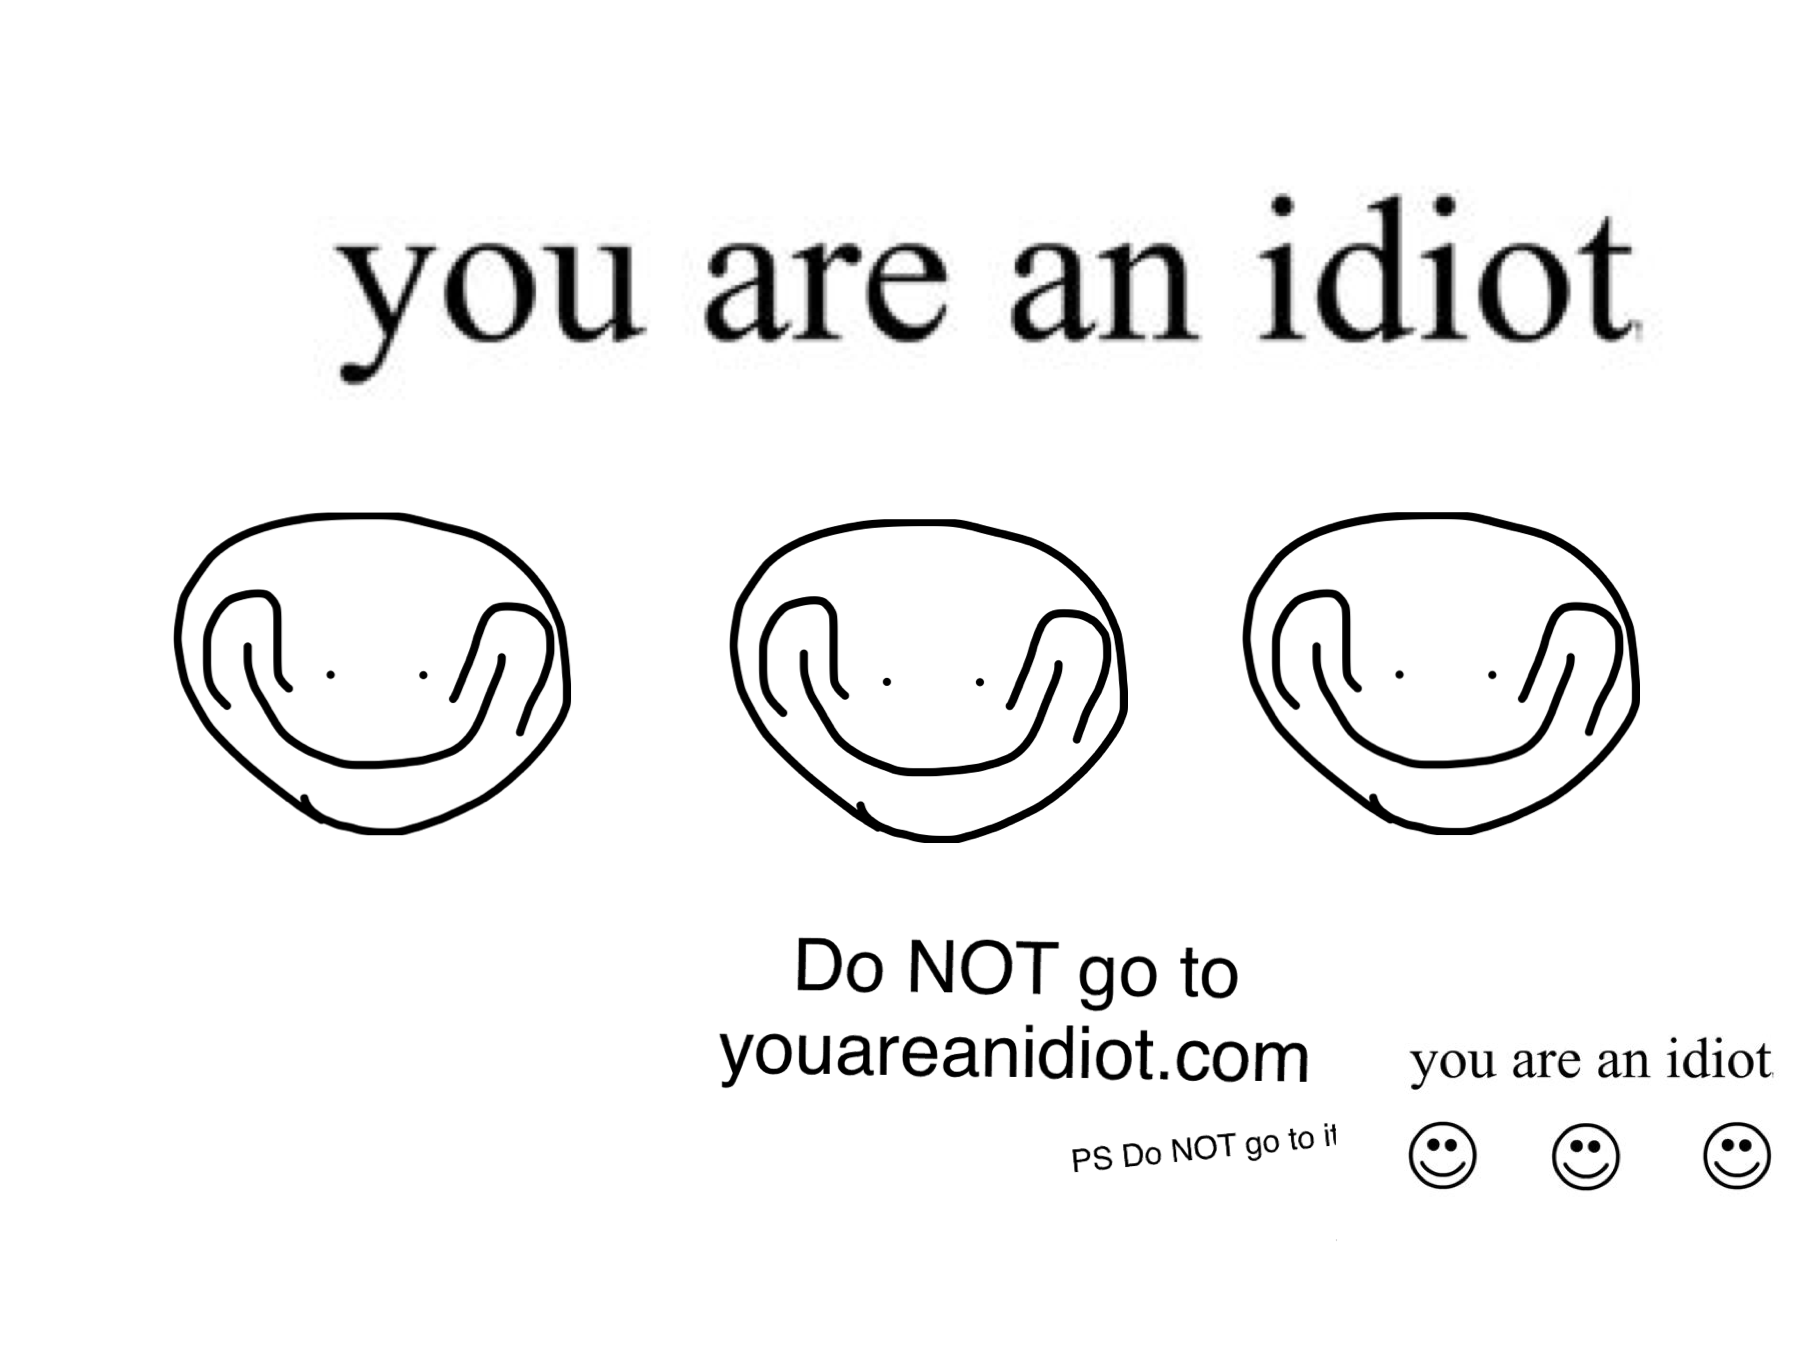 You are not an idiot 